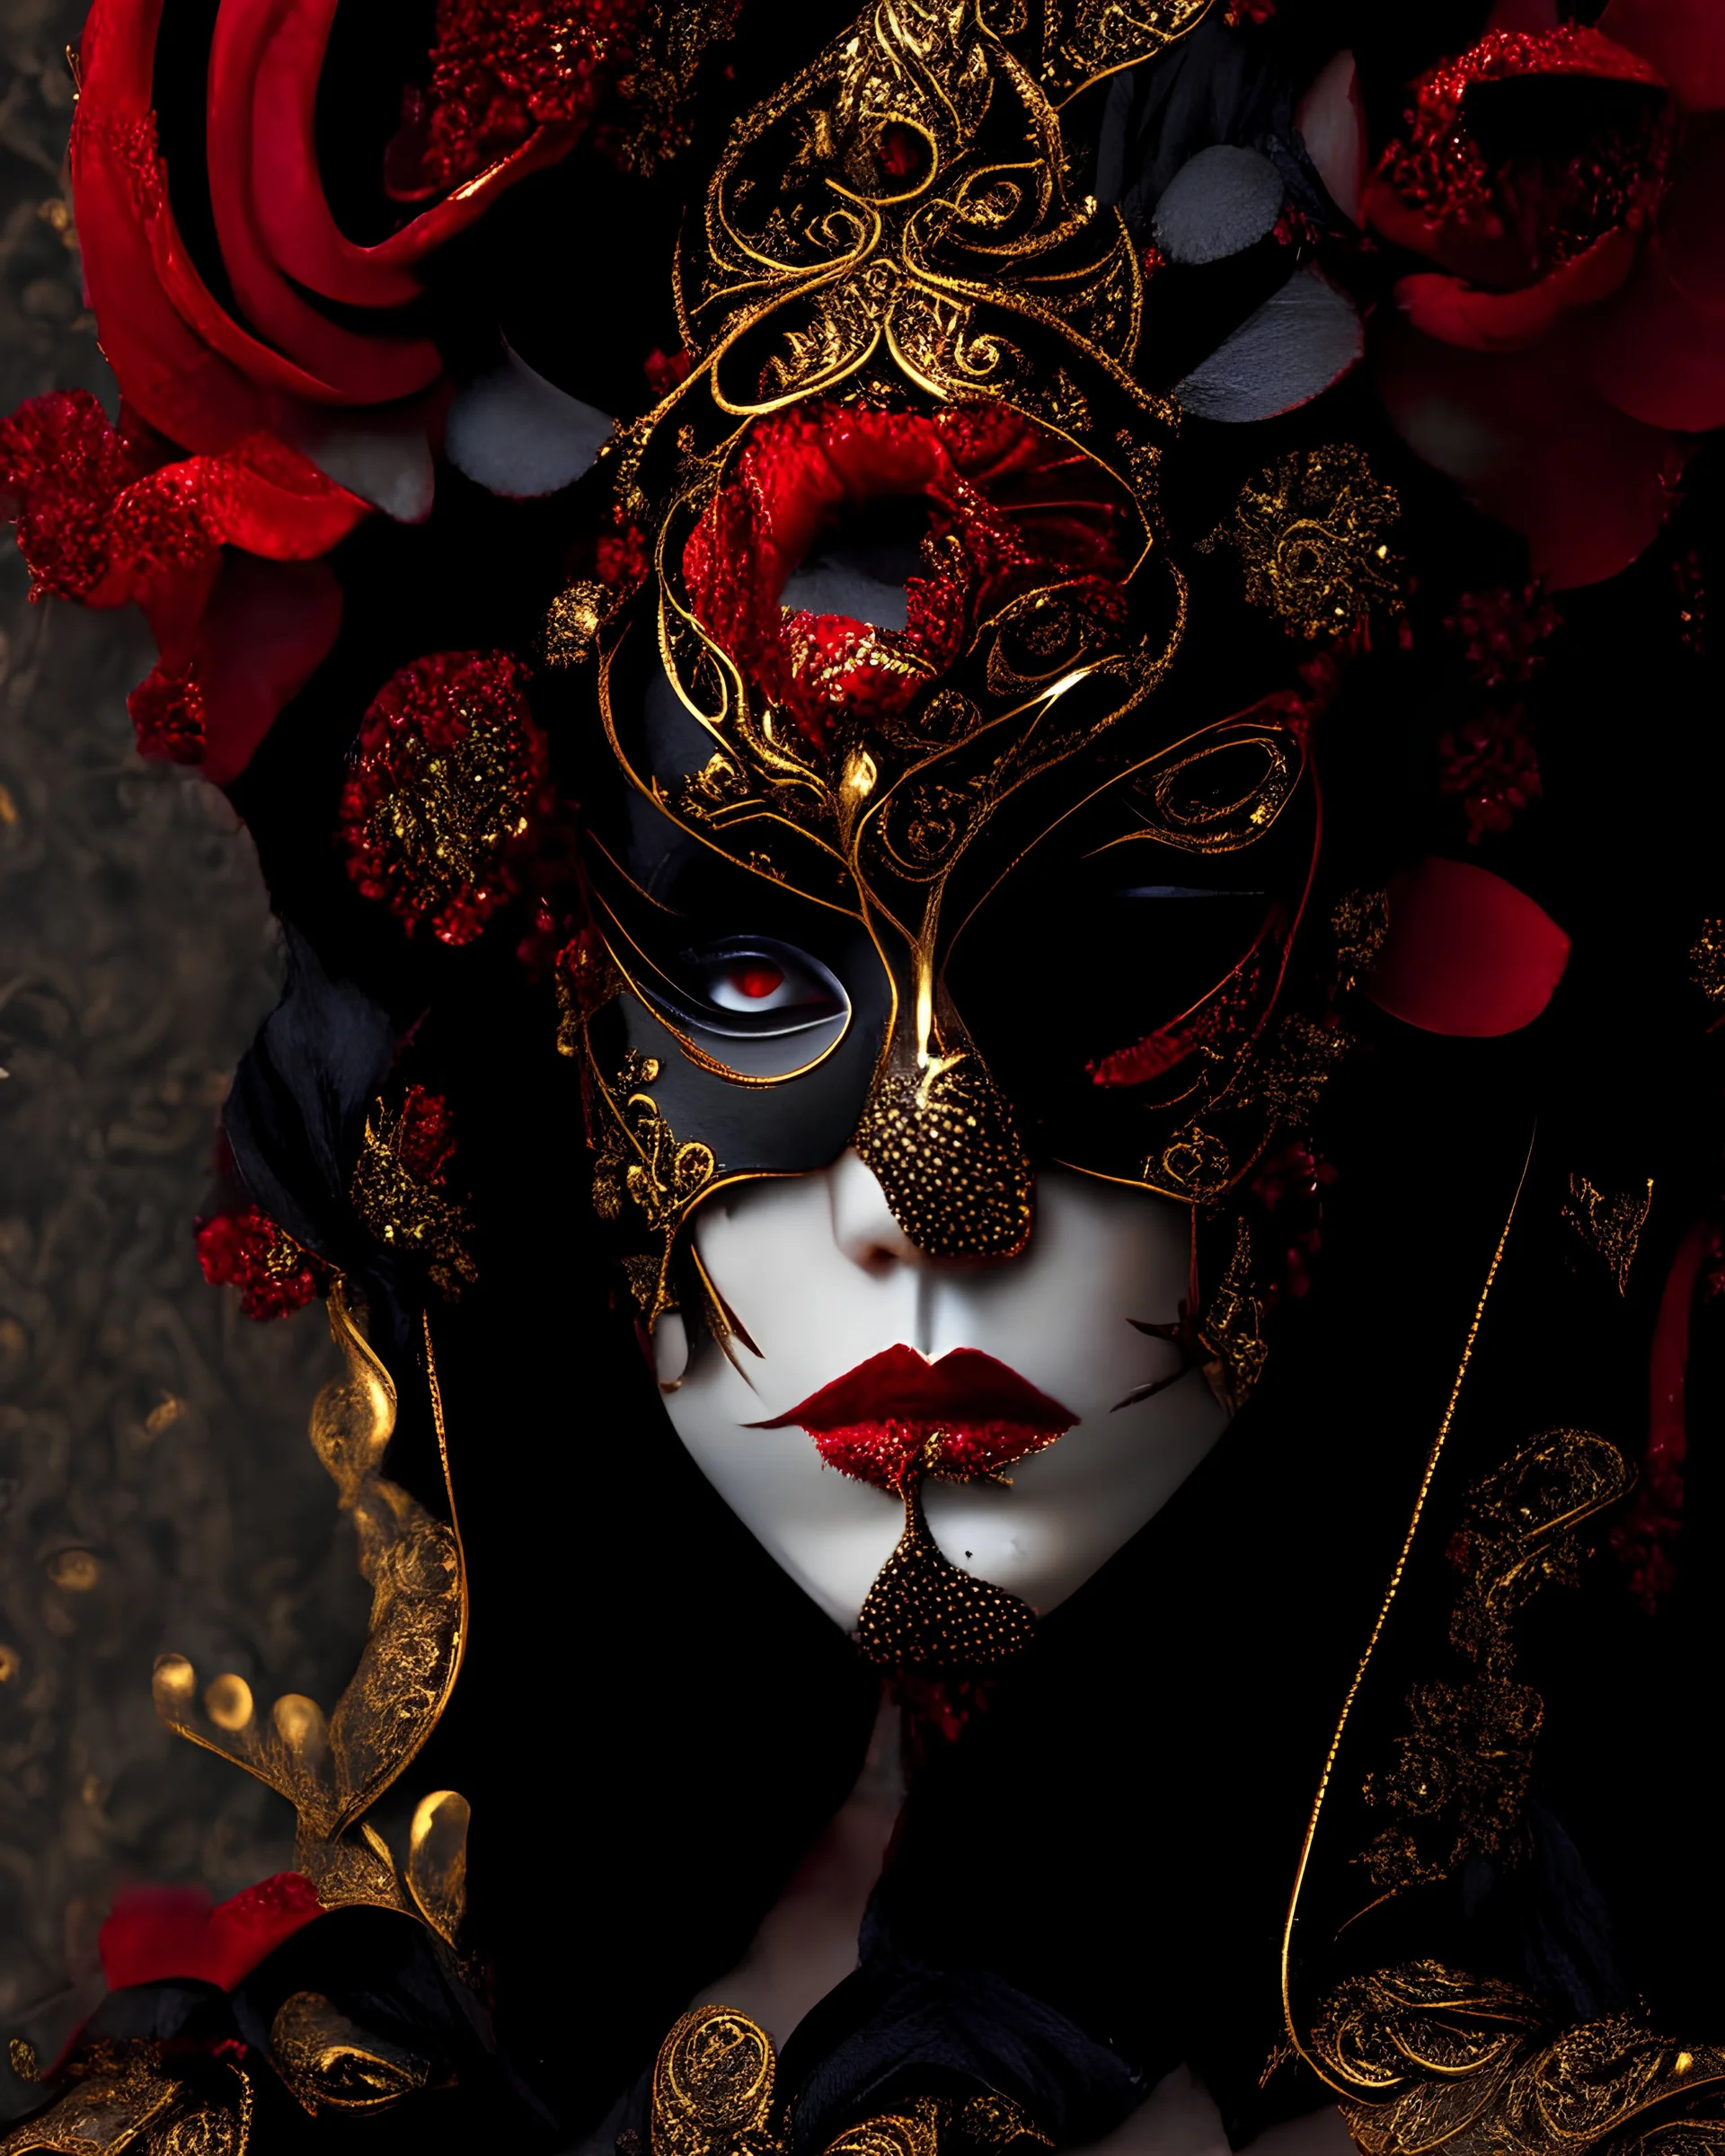 Beautiful young venetian carnival style woman portrait adorned vith voidcore shamanism black camelia flower and ginger red camelia venetian style headress textured botanical Golden filigree floral embossed and black crand ginger red venetian masque and wearing voidcore shamanism textured camelia flower ornated metallic gothica ornated costume armour organic bio spinal ribbed detail of vantablack gothica background extremely detailed hyperrealistic maximálist concept portrait art